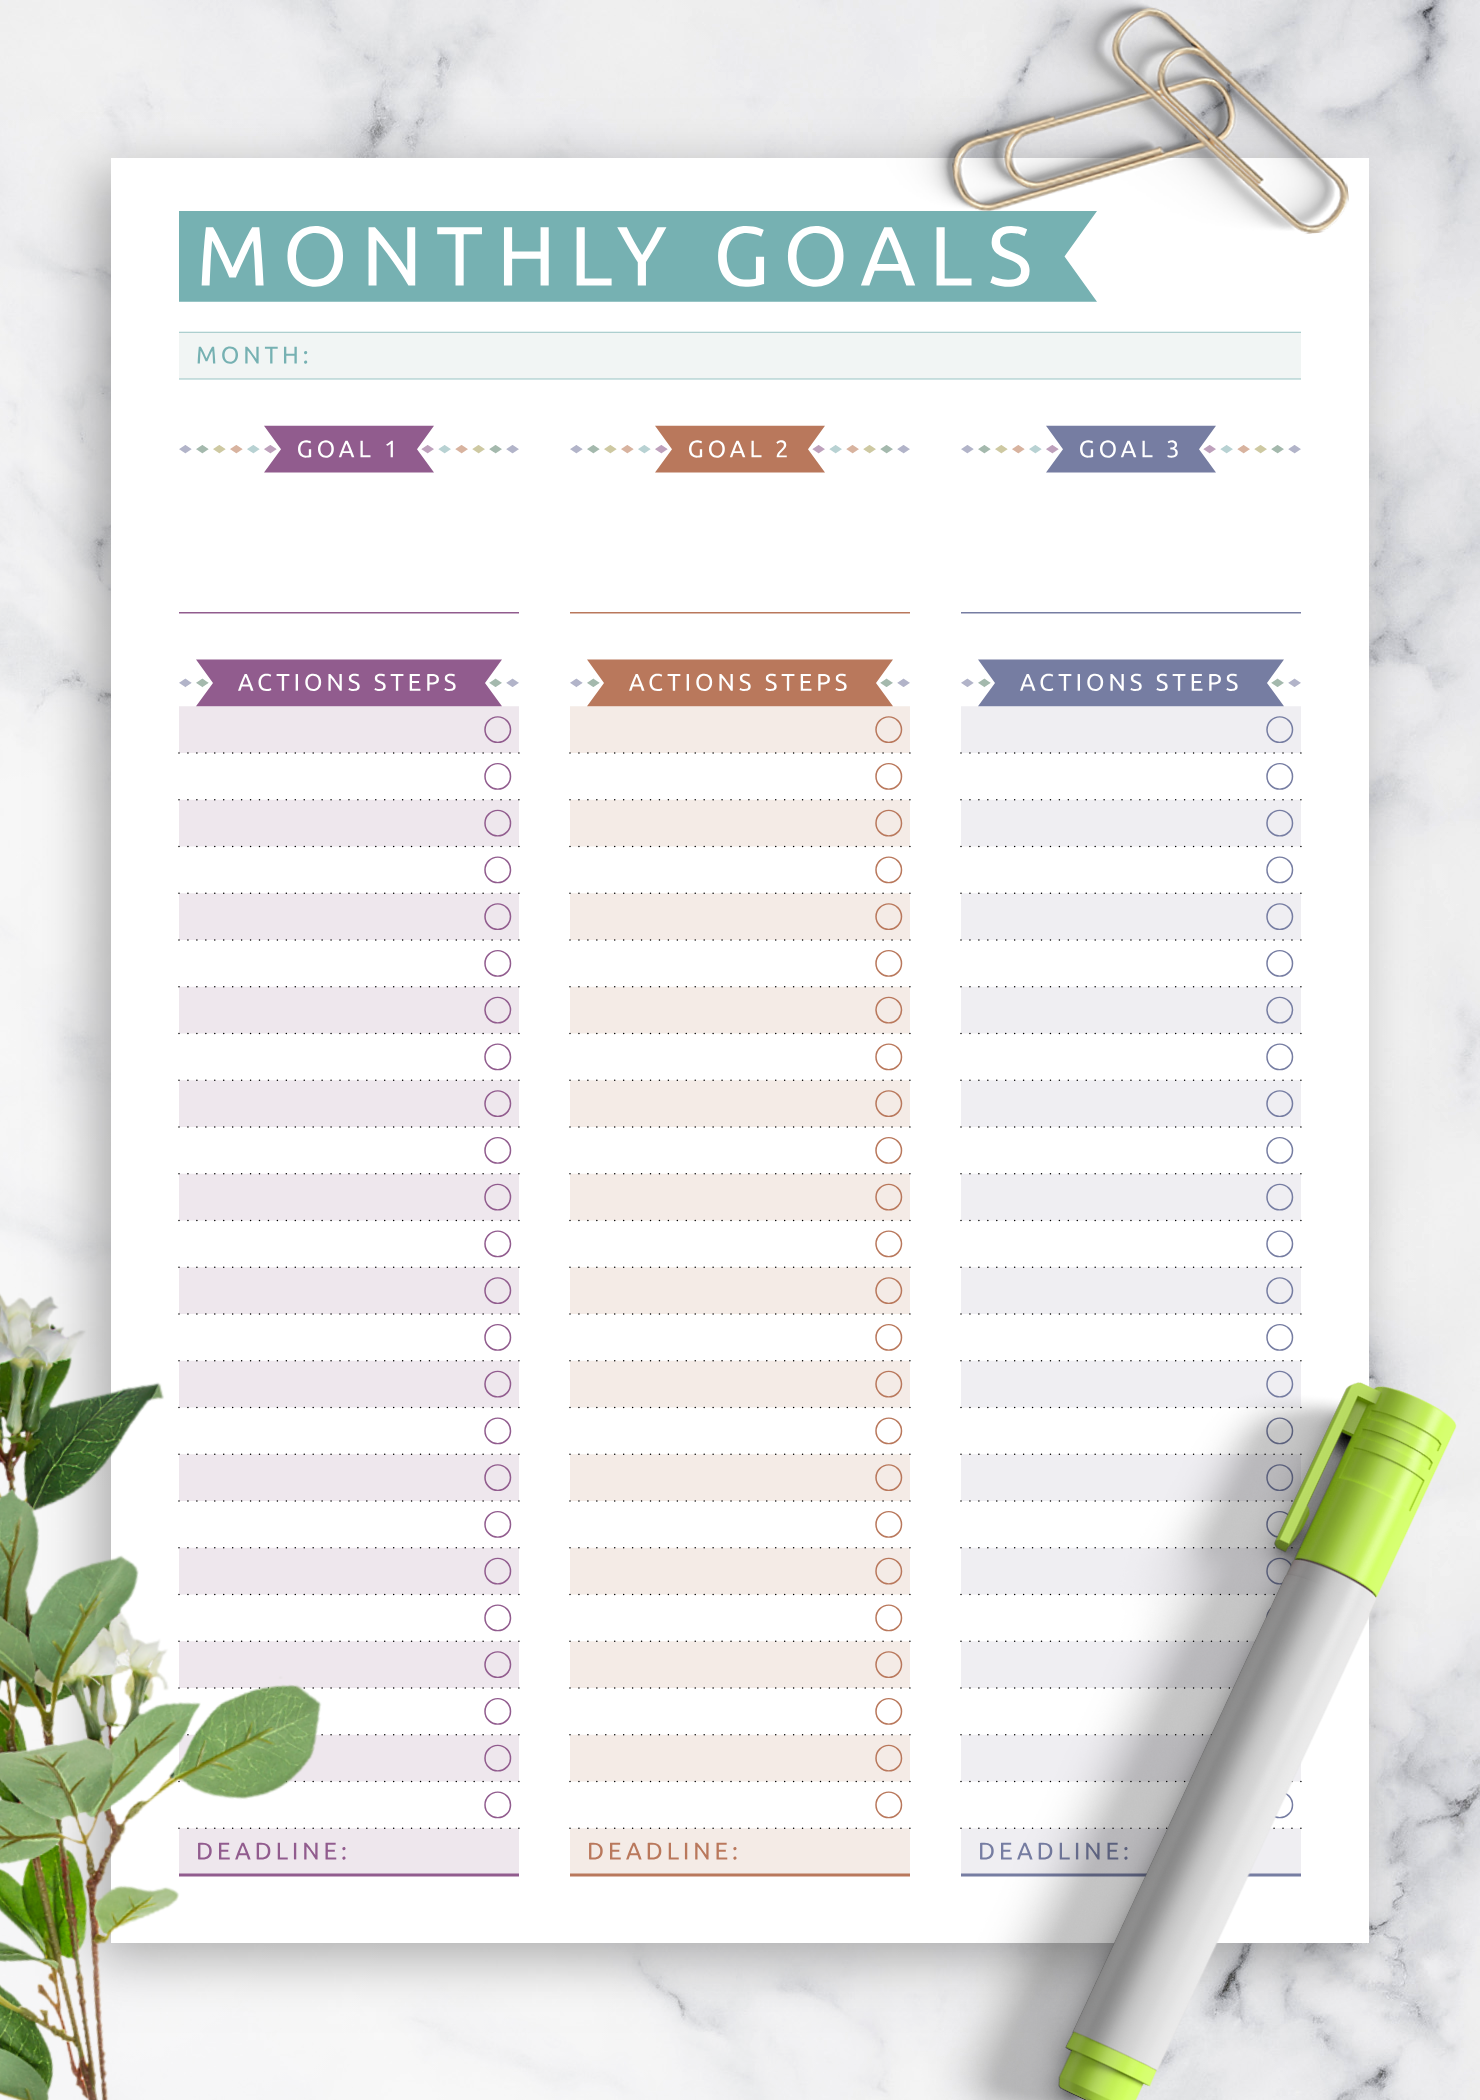 Monthly Goals Template Word